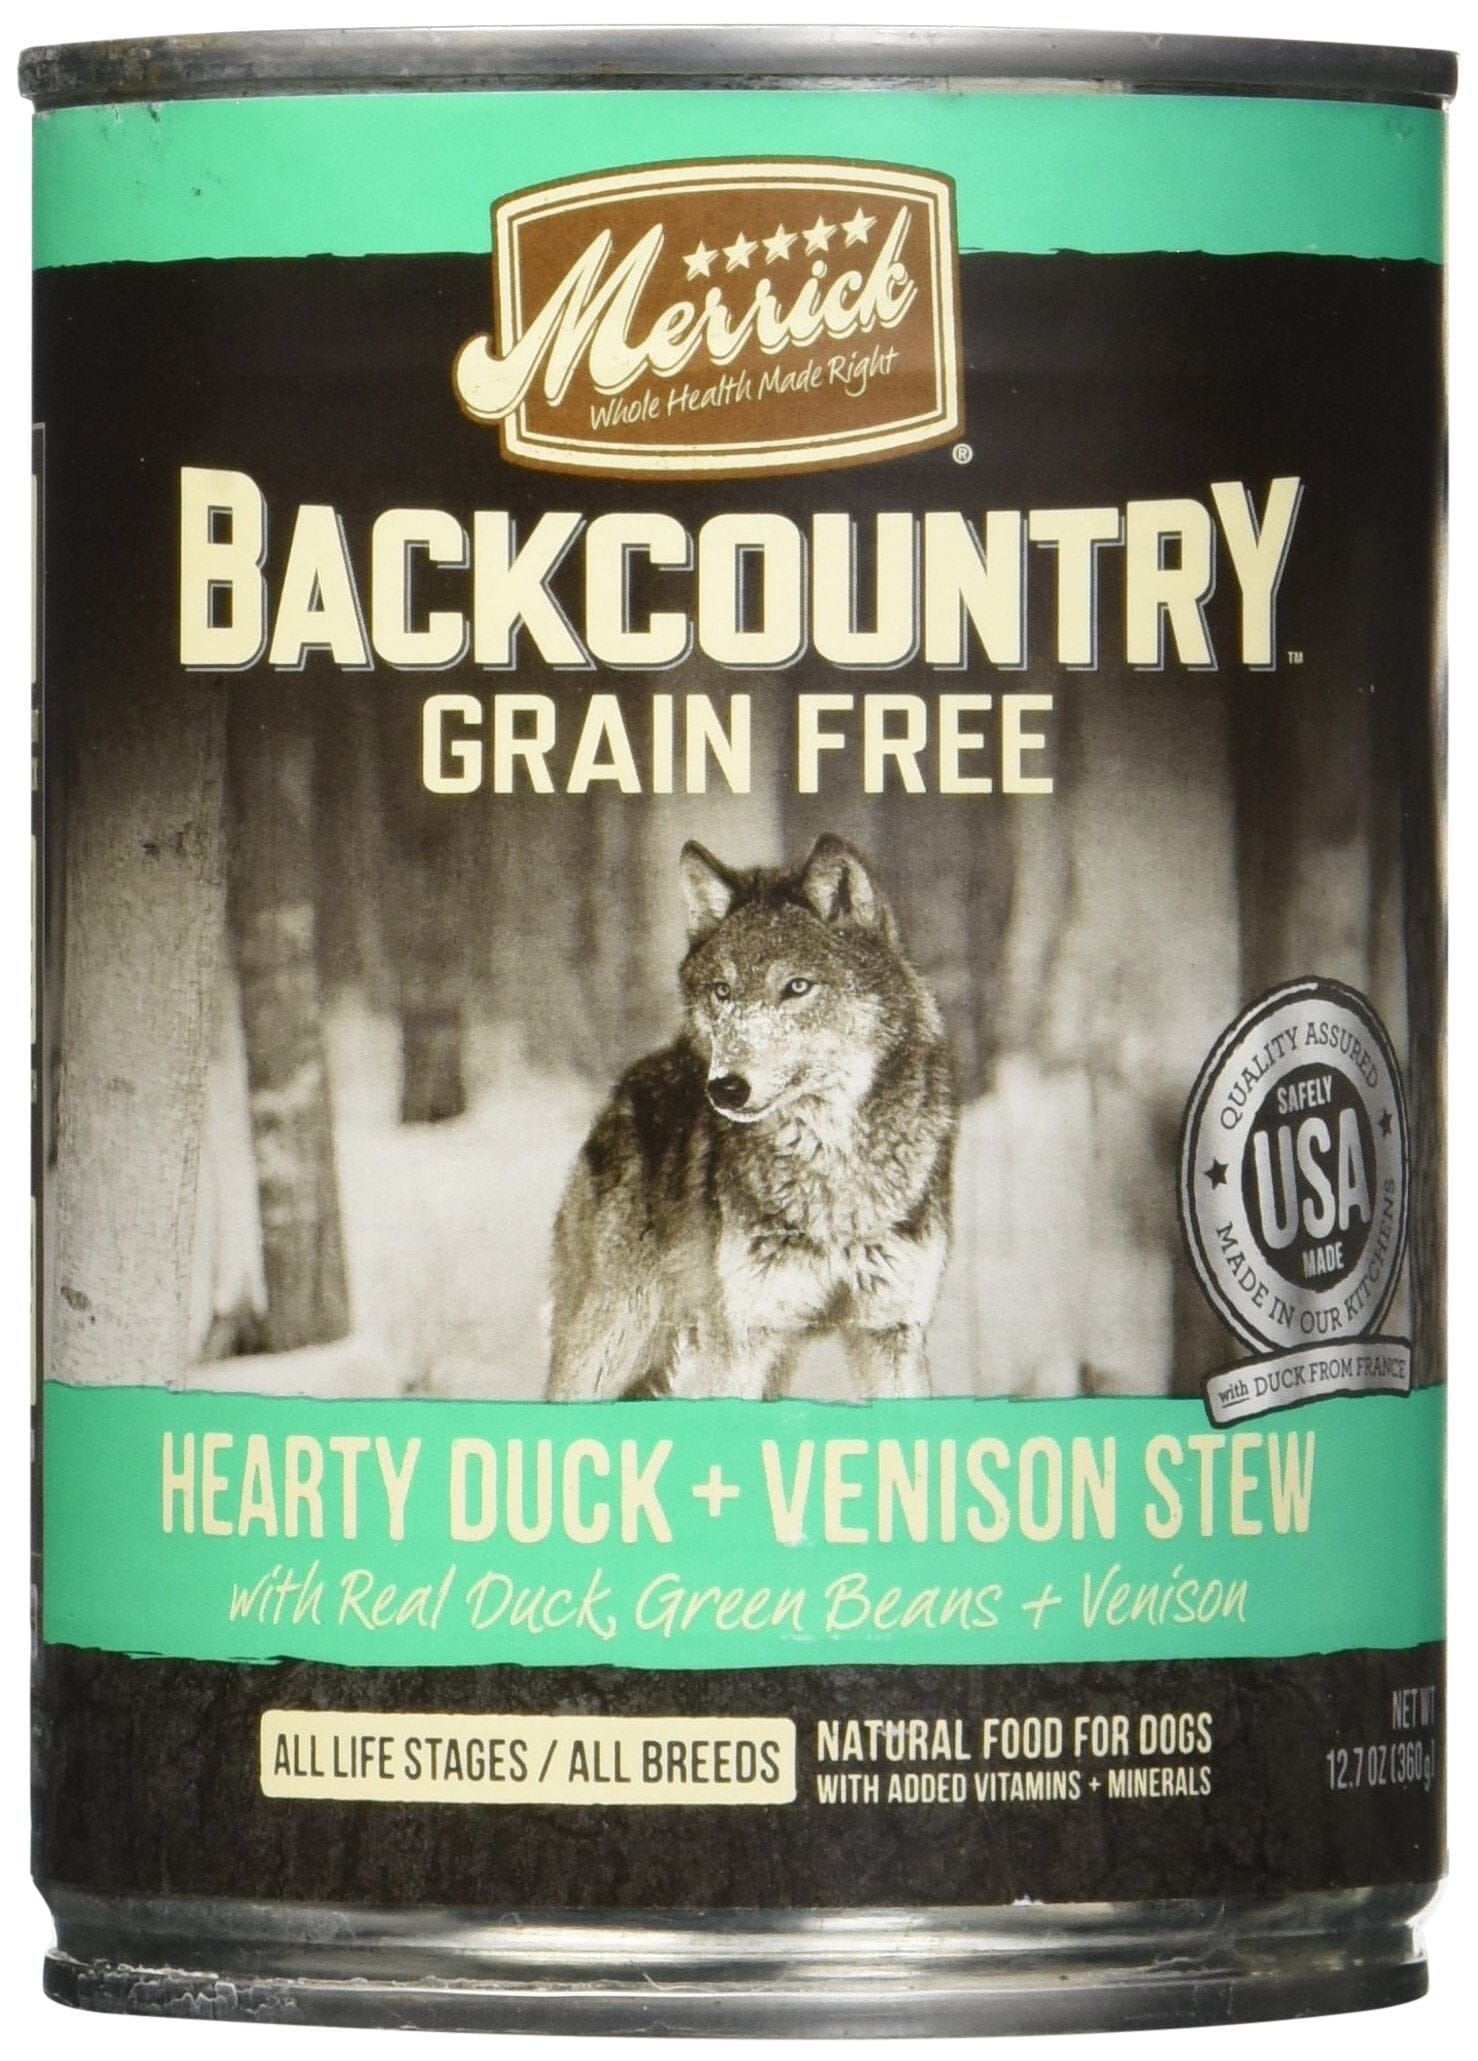 Merrick Backcountry Grain-Free Healthy Duck and Venison Stew Canned Dog Food - 12.7 Oz - Case of 12  